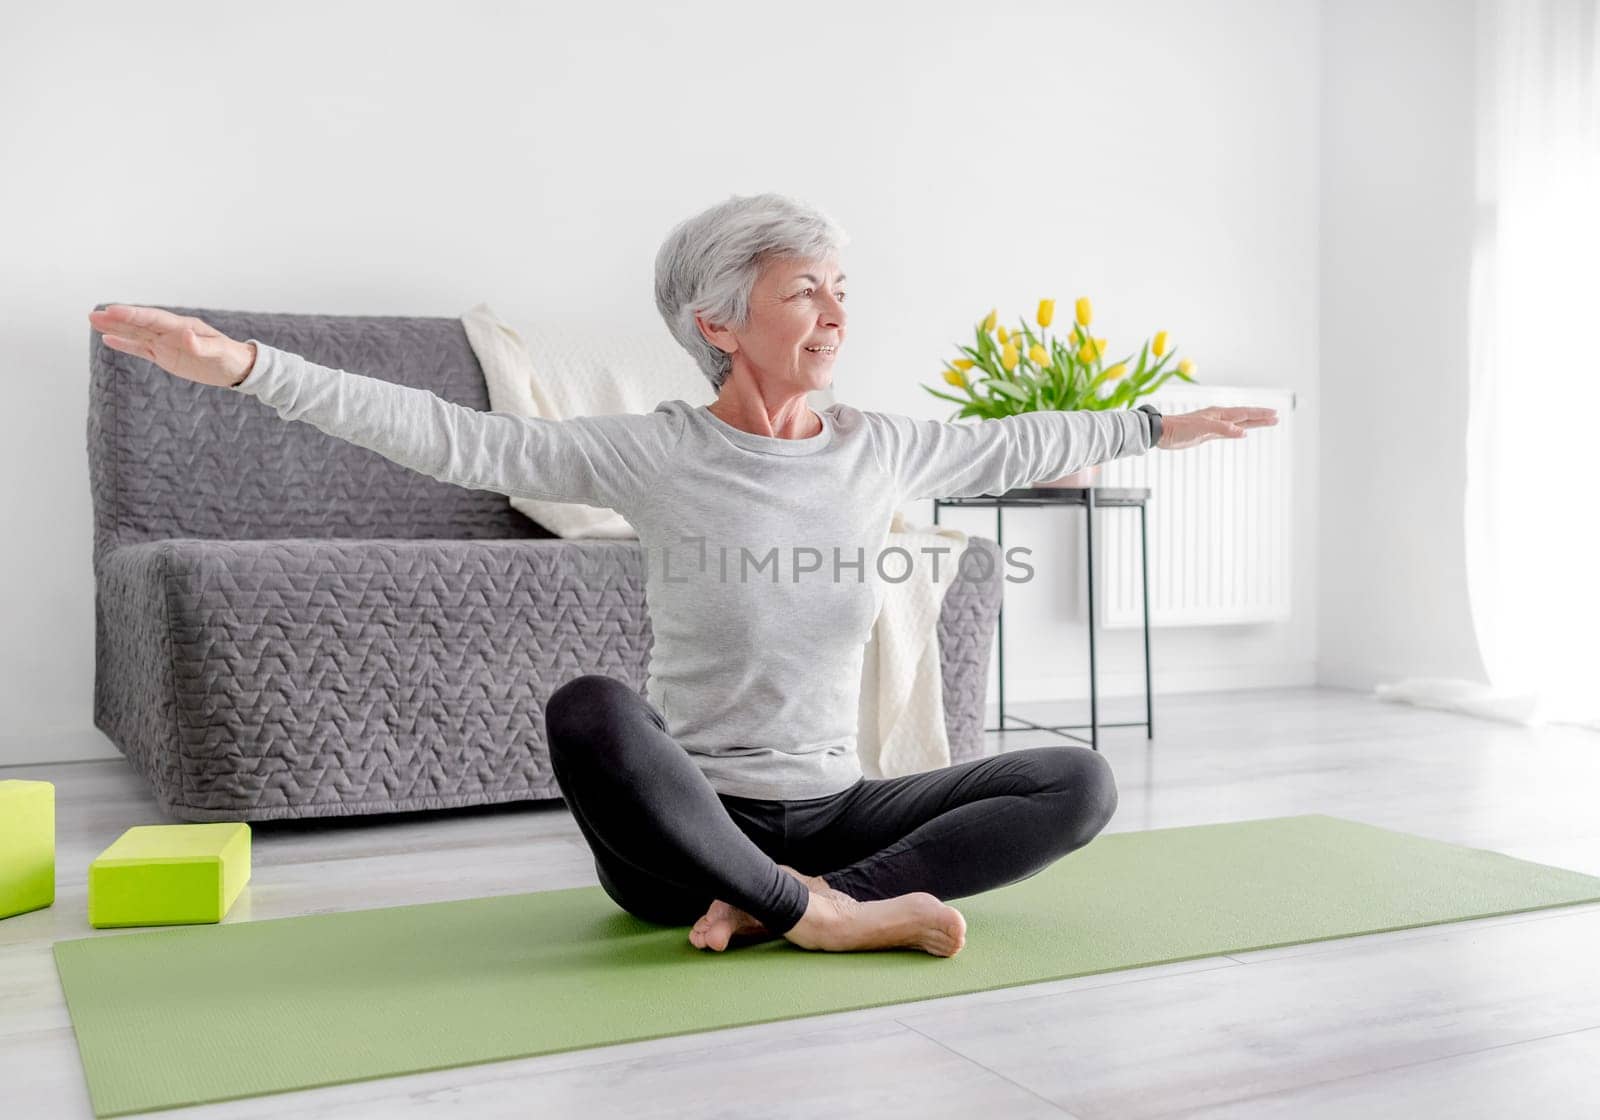 Calm Exercises At Home In A Bright Room by tan4ikk1